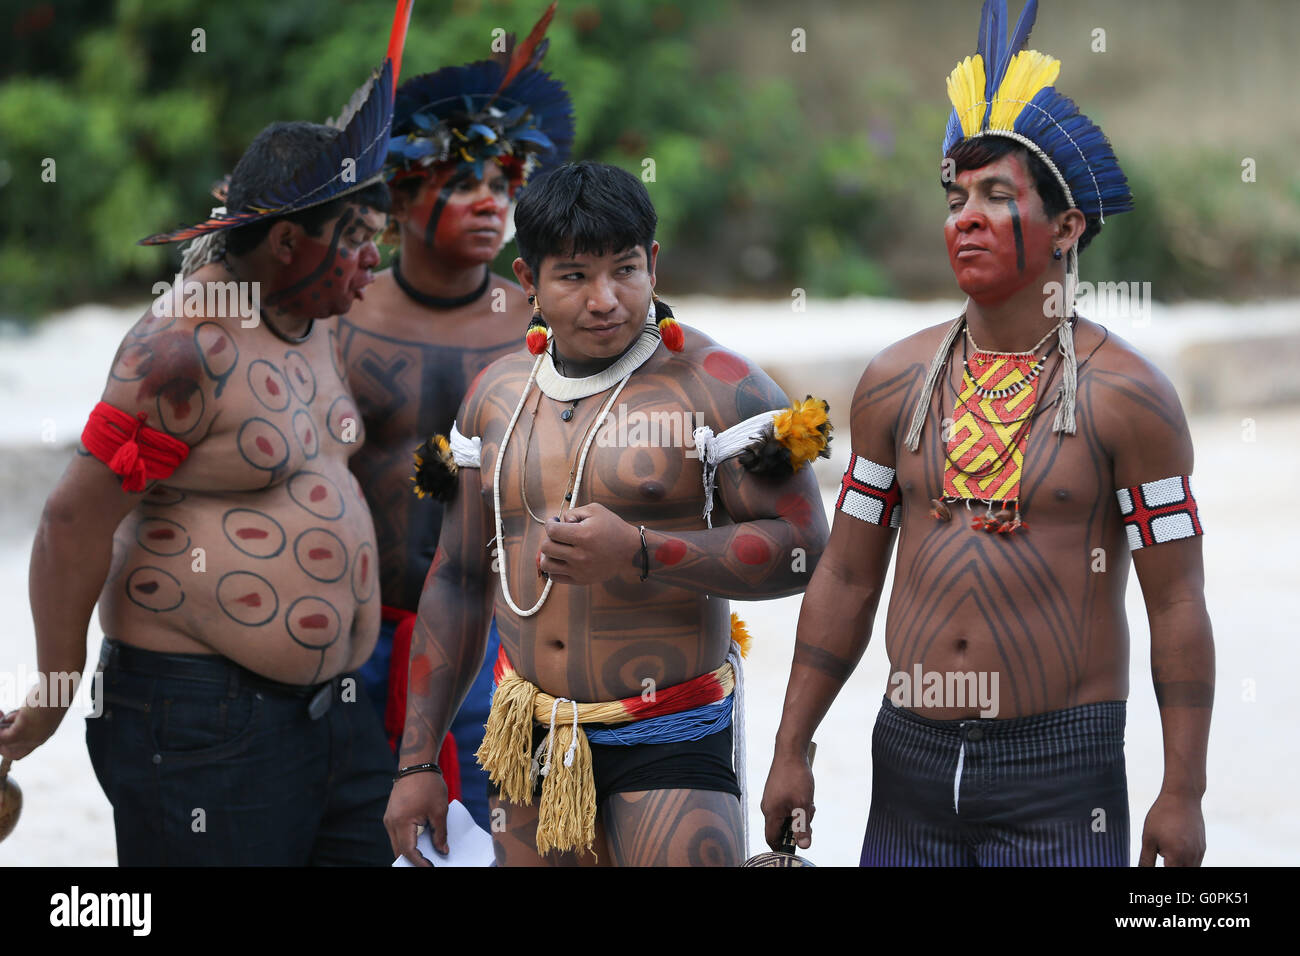 Brazilian indigenous torch carriers prepare for their turn as the Olympic flame relay kicks off May 3, 2016 in Brasilia, Brazil. The torch relay will begin a three month journey around Brazil before arriving for the Rio de Janeiro Olympics in August. Stock Photo